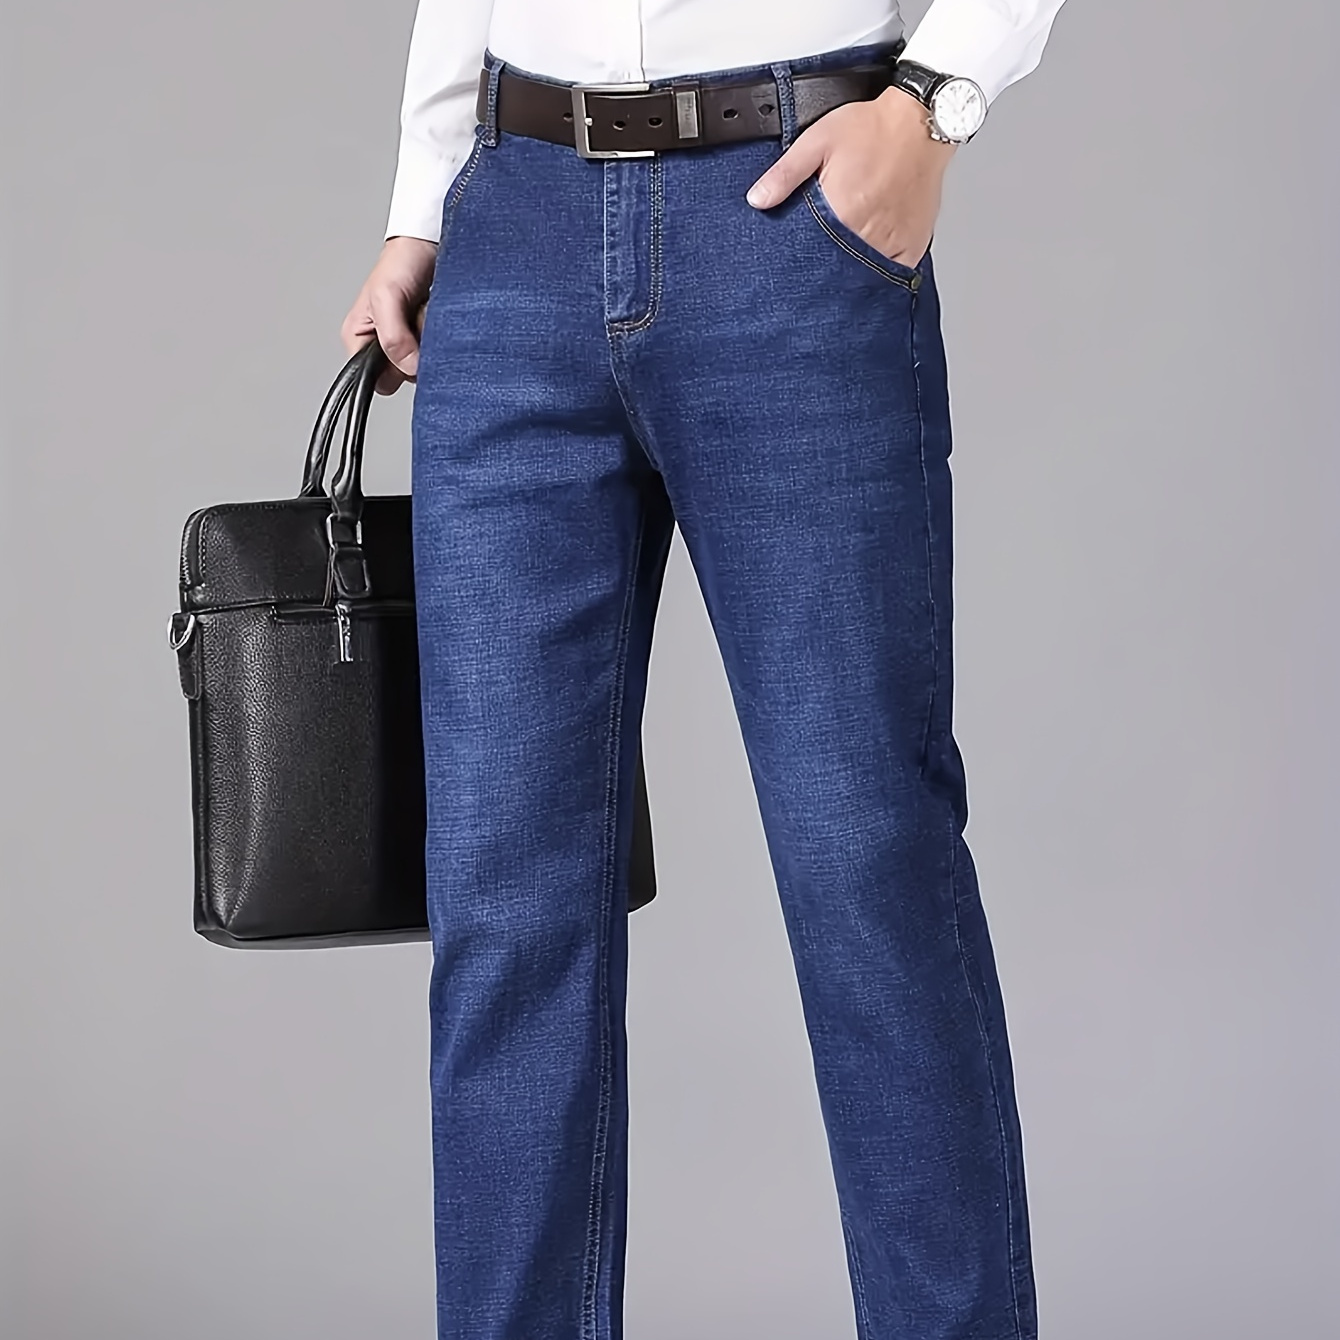 

Men's Solid Denim Jeans, Light Business Style Slightly Stretch Straight Leg Pants For Outdoor Casual Daily